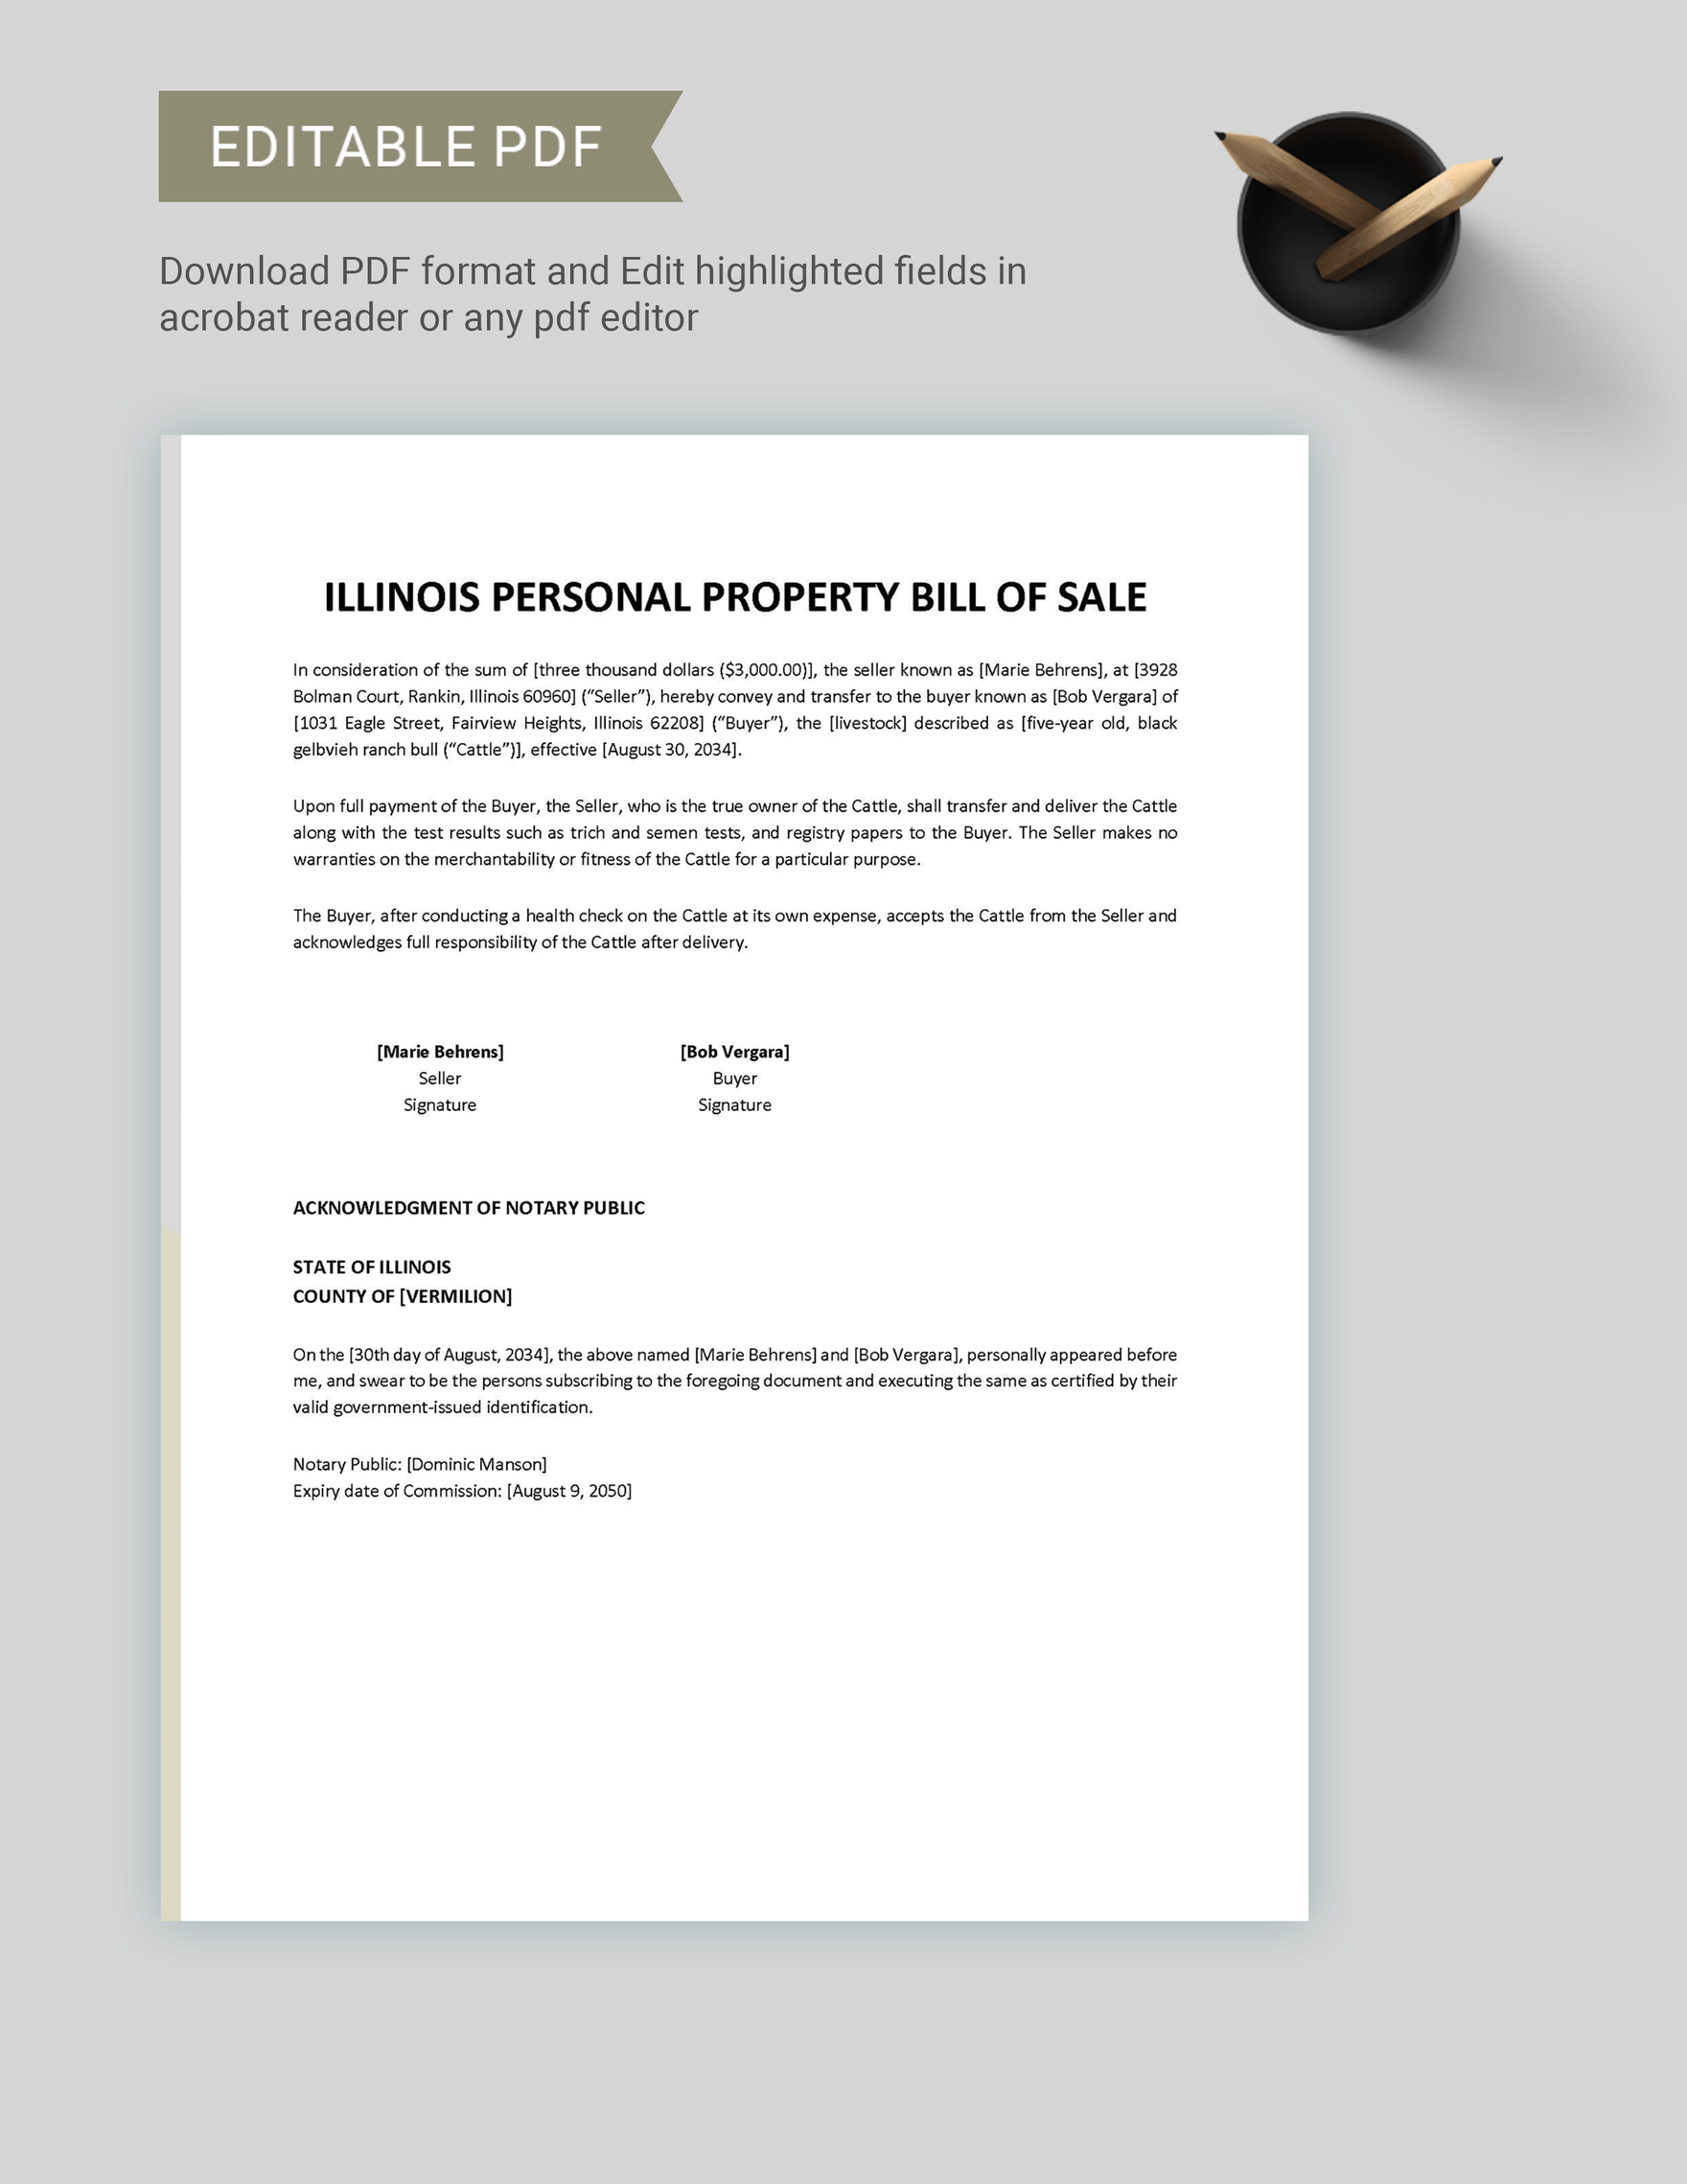 Illinois Personal Property Bill of Sale Template